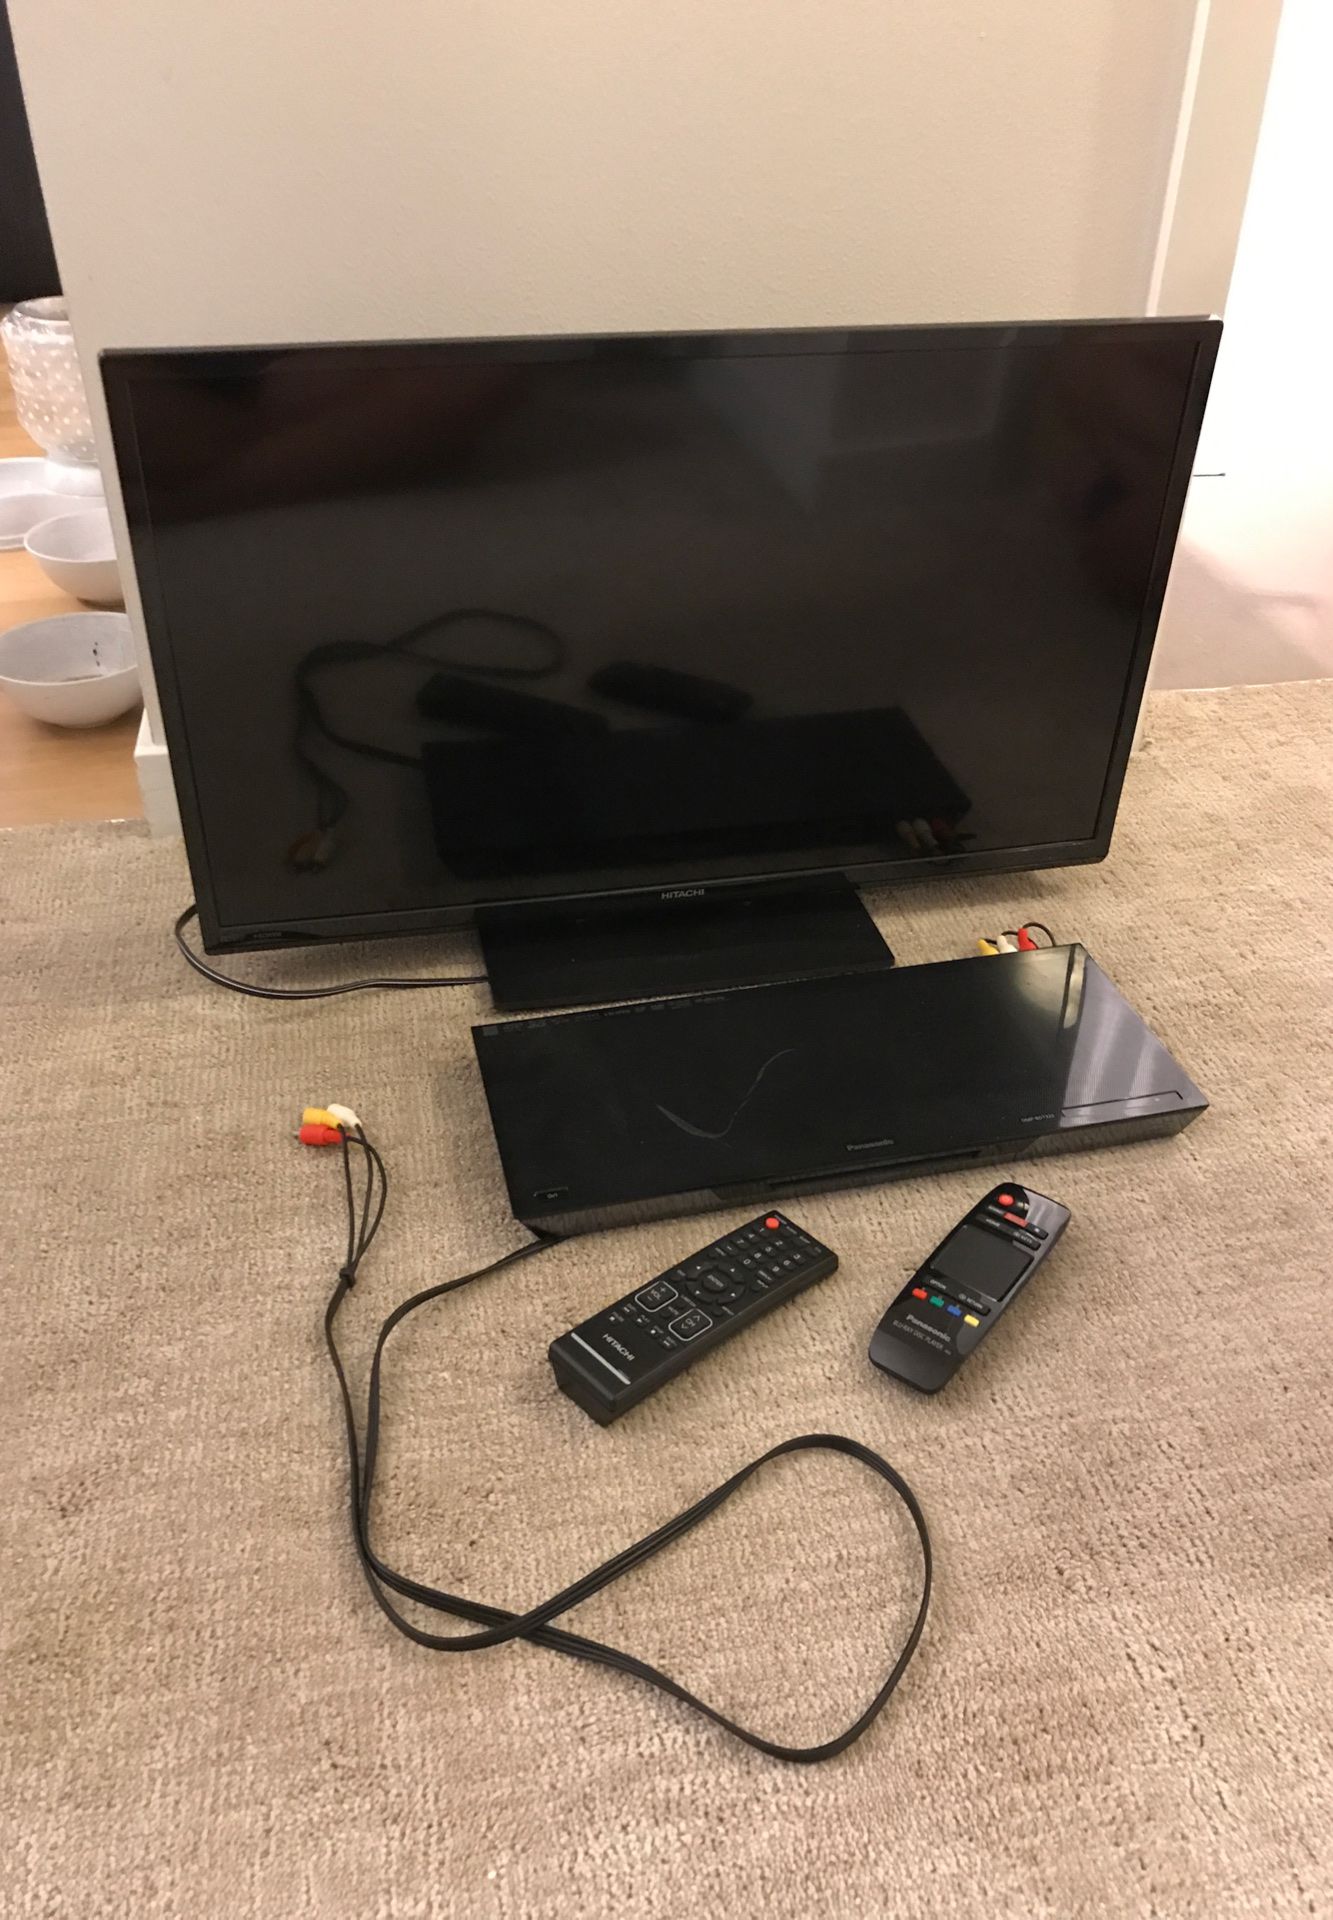 30in Hitachi TV and 17 in Panasonic DVD player